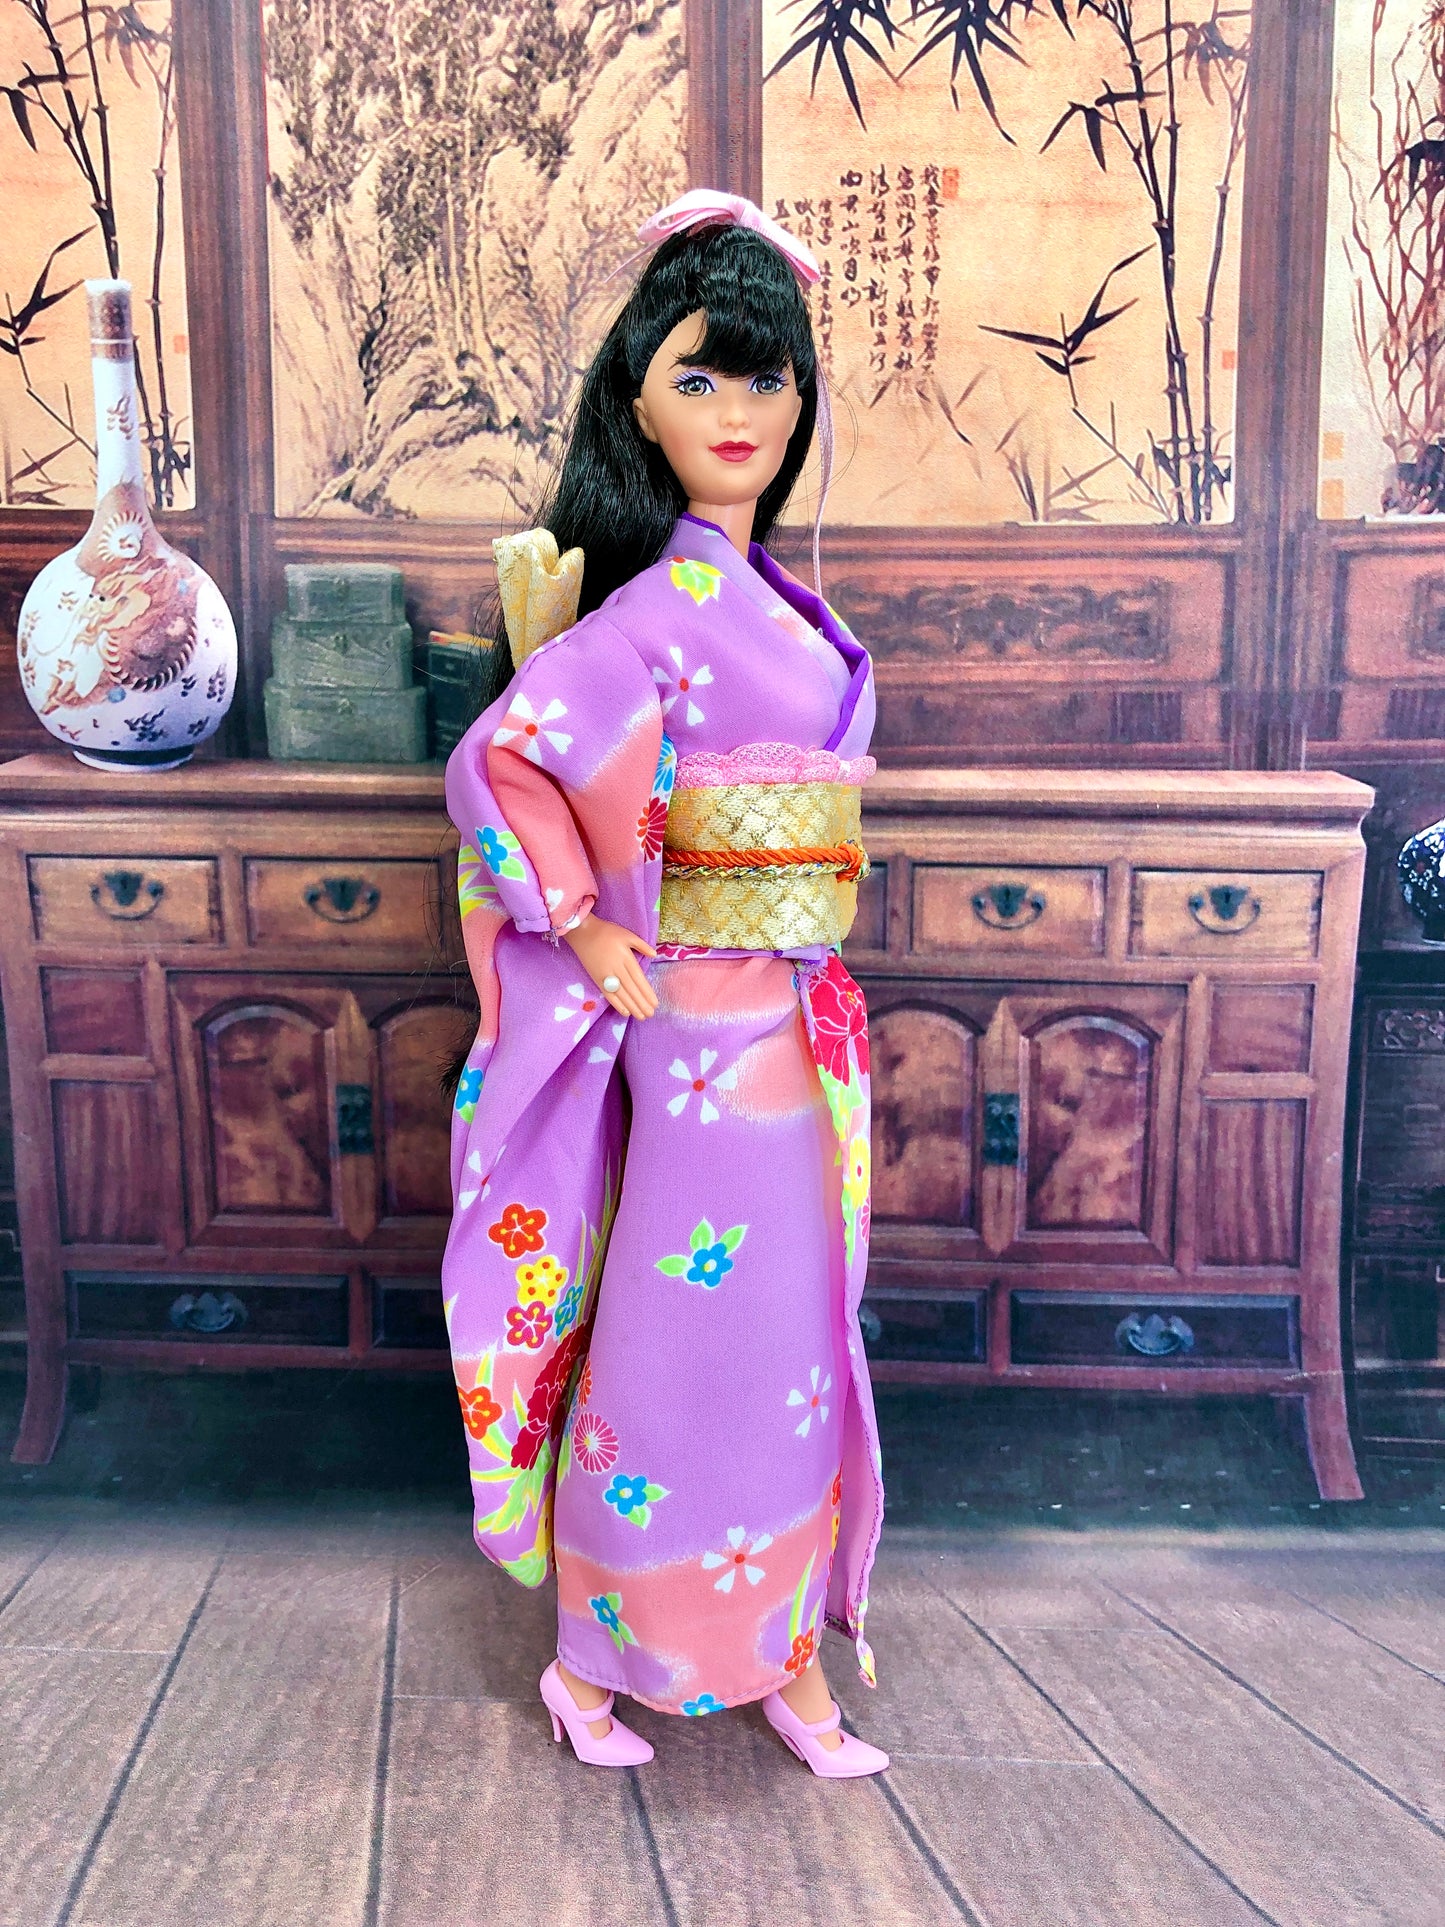 Japanese Barbie 1995 DOLLS OF THE WORLD COLLECTOR EDITION by Mattel